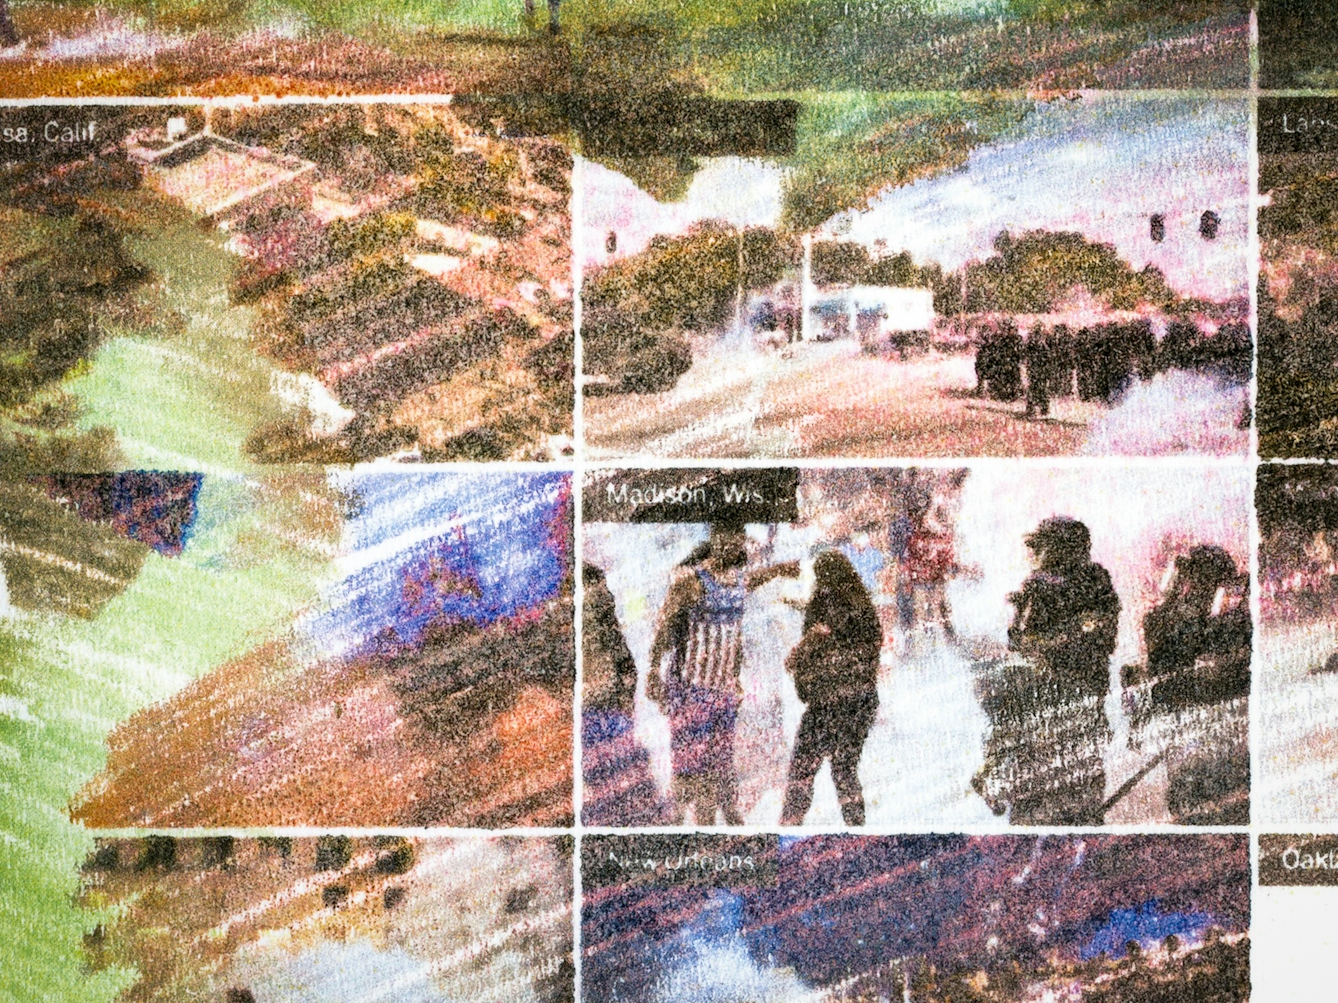 Detail from a larger paper artwork showing a grid of colour images which have been artistically distressed with coloured overlaid brush strokes. The images are all from demonstrations in the USA and show protestors surrounded by clouds of tear gas and confrontations with law enforcement officers. In the corner of each small image is a small block of text which gives the location such as 'Oakland, Calif', Portland, Ore'.